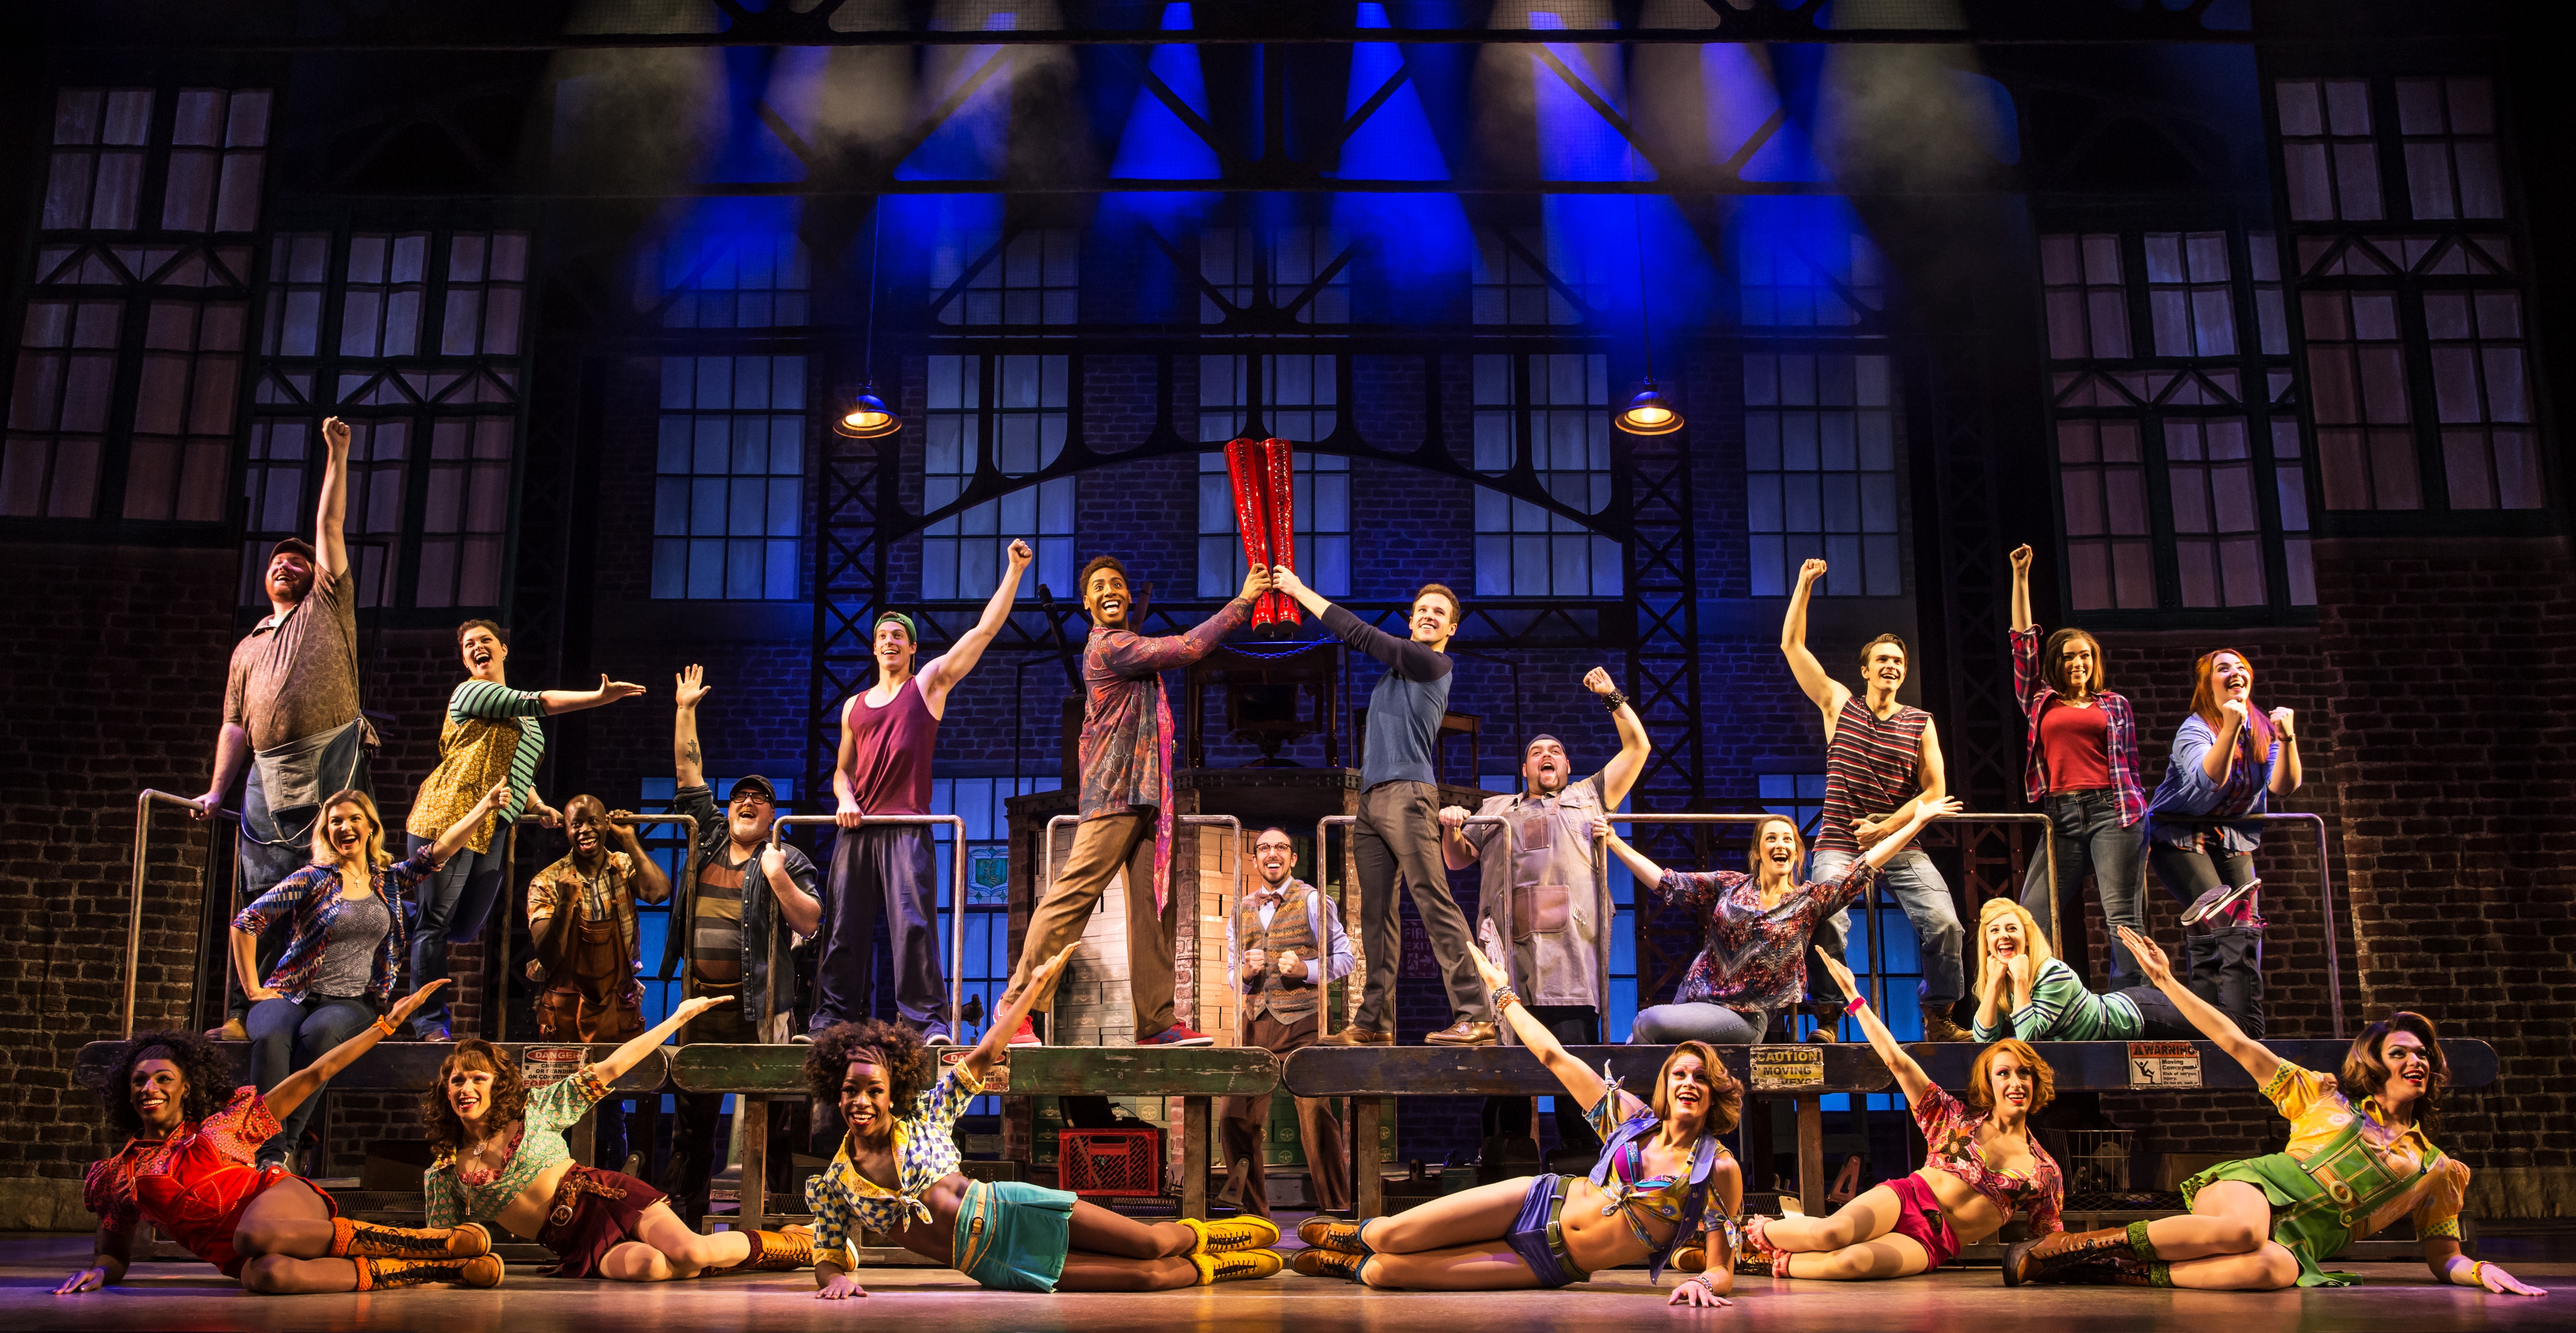 Review: ‘Kinky Boots’ breaks down gender norms with joy and sweetness